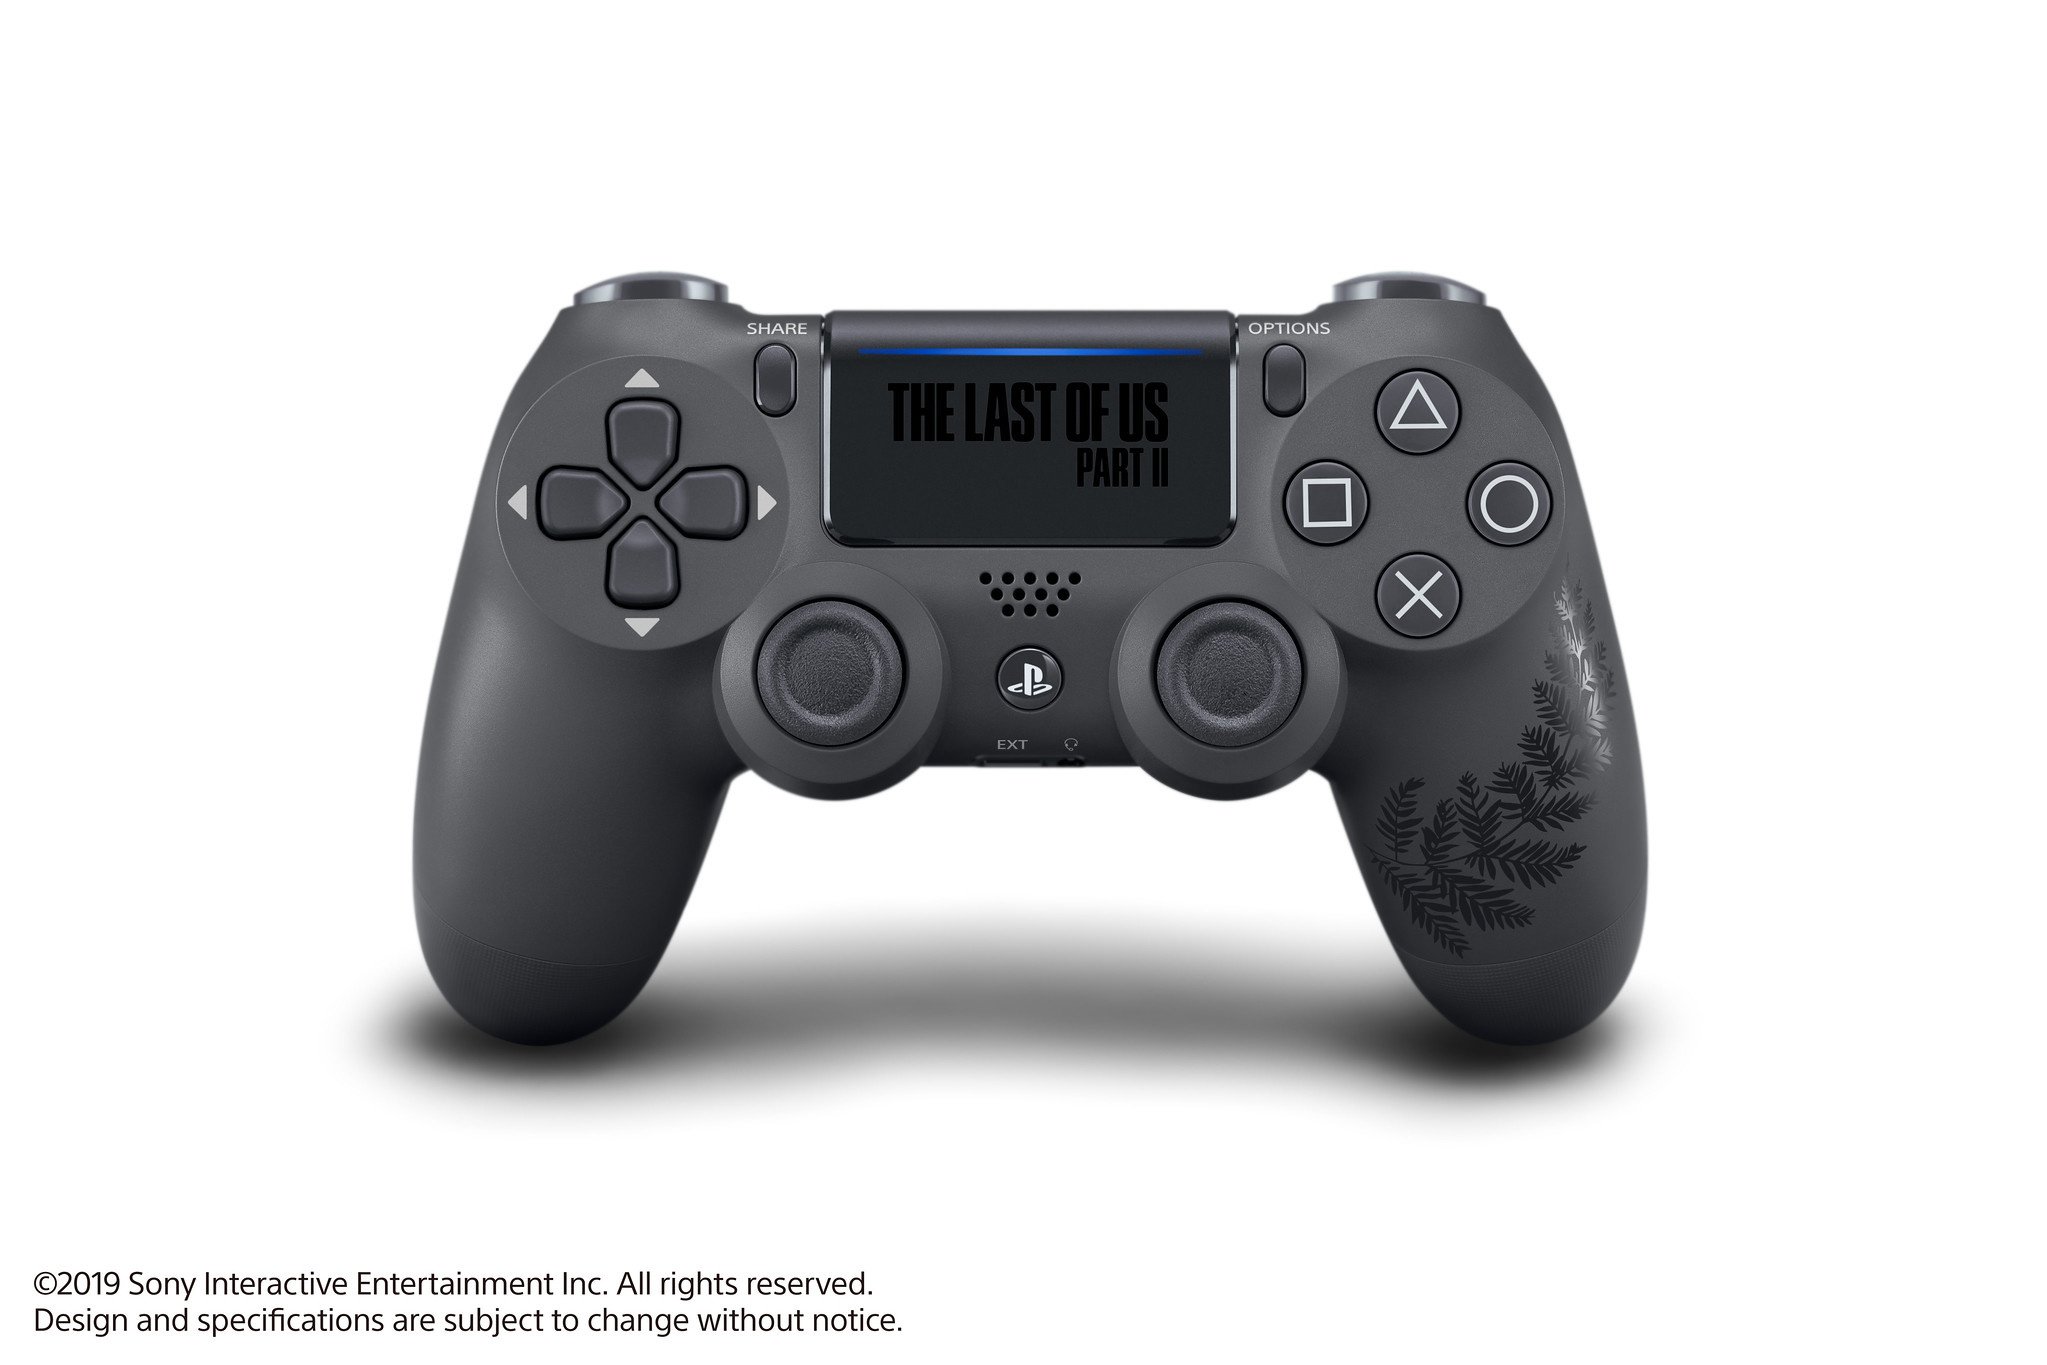 the-last-of-us-part-ii-ps4-playstation-4-pro-limited-edition-controller.original.jpg